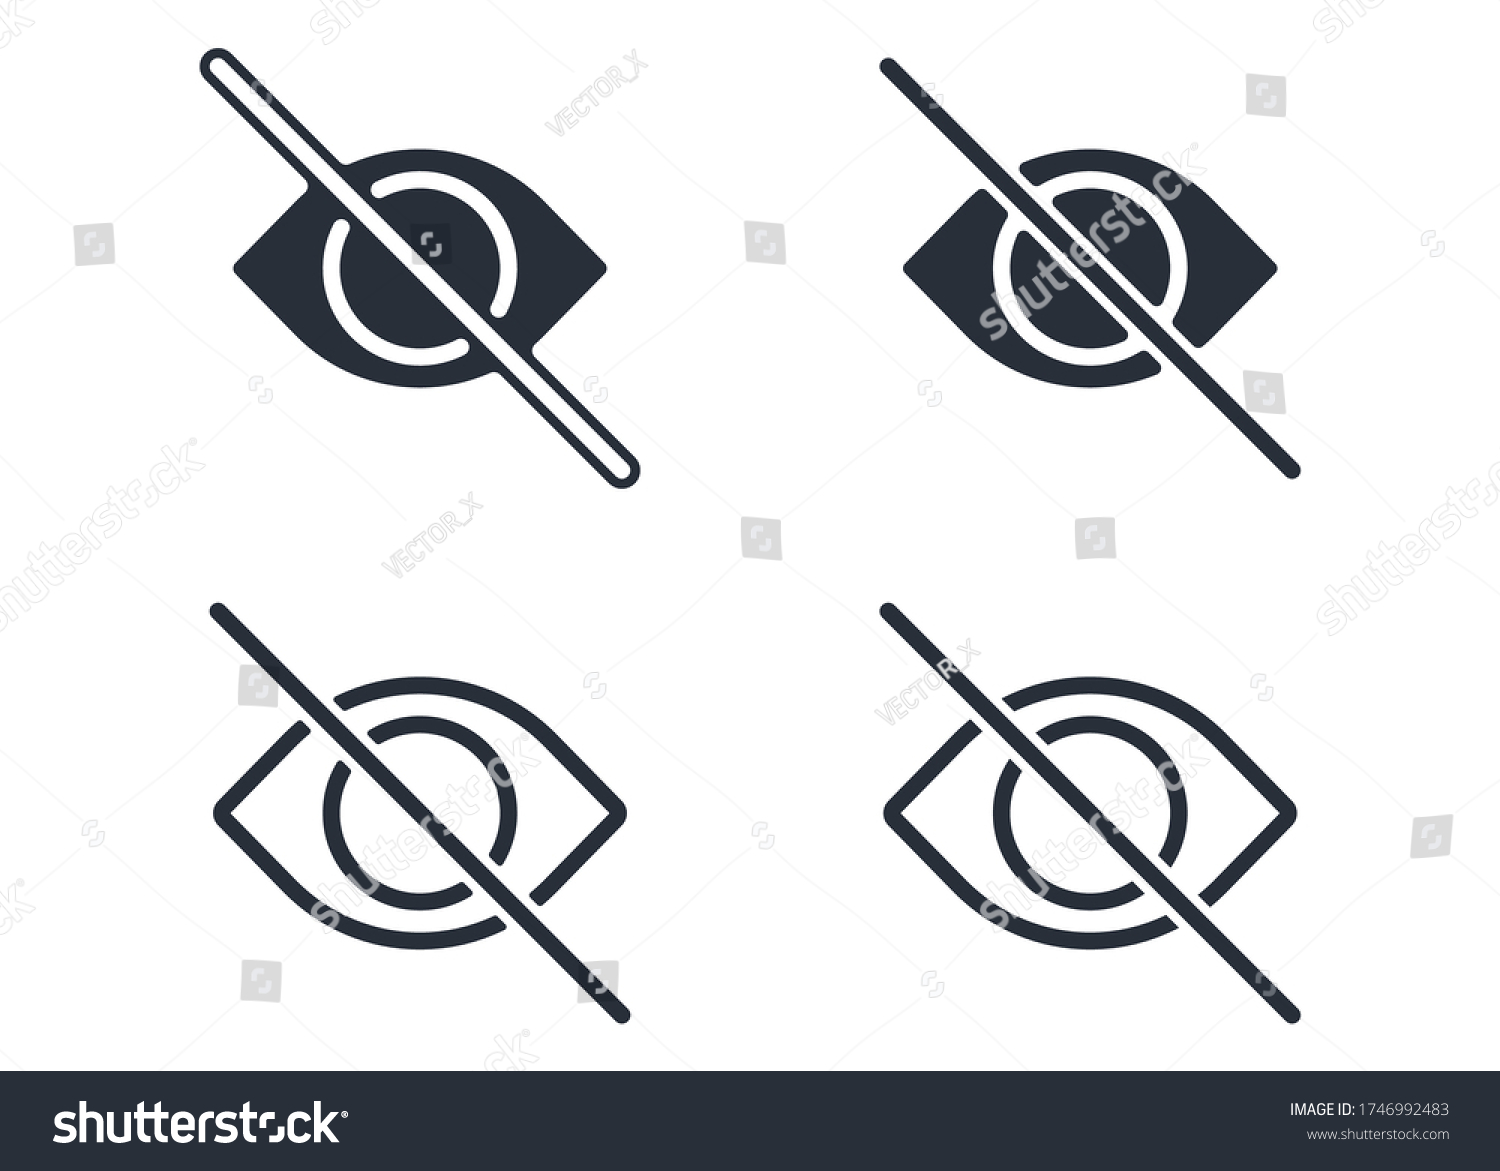 SVG of Eye. Caution. Icon for sensitive photo content or explicit video content, inappropriate content, internet safety concept, censored only adult 18 plus, attention Sign. Vector Illustration symbol. svg